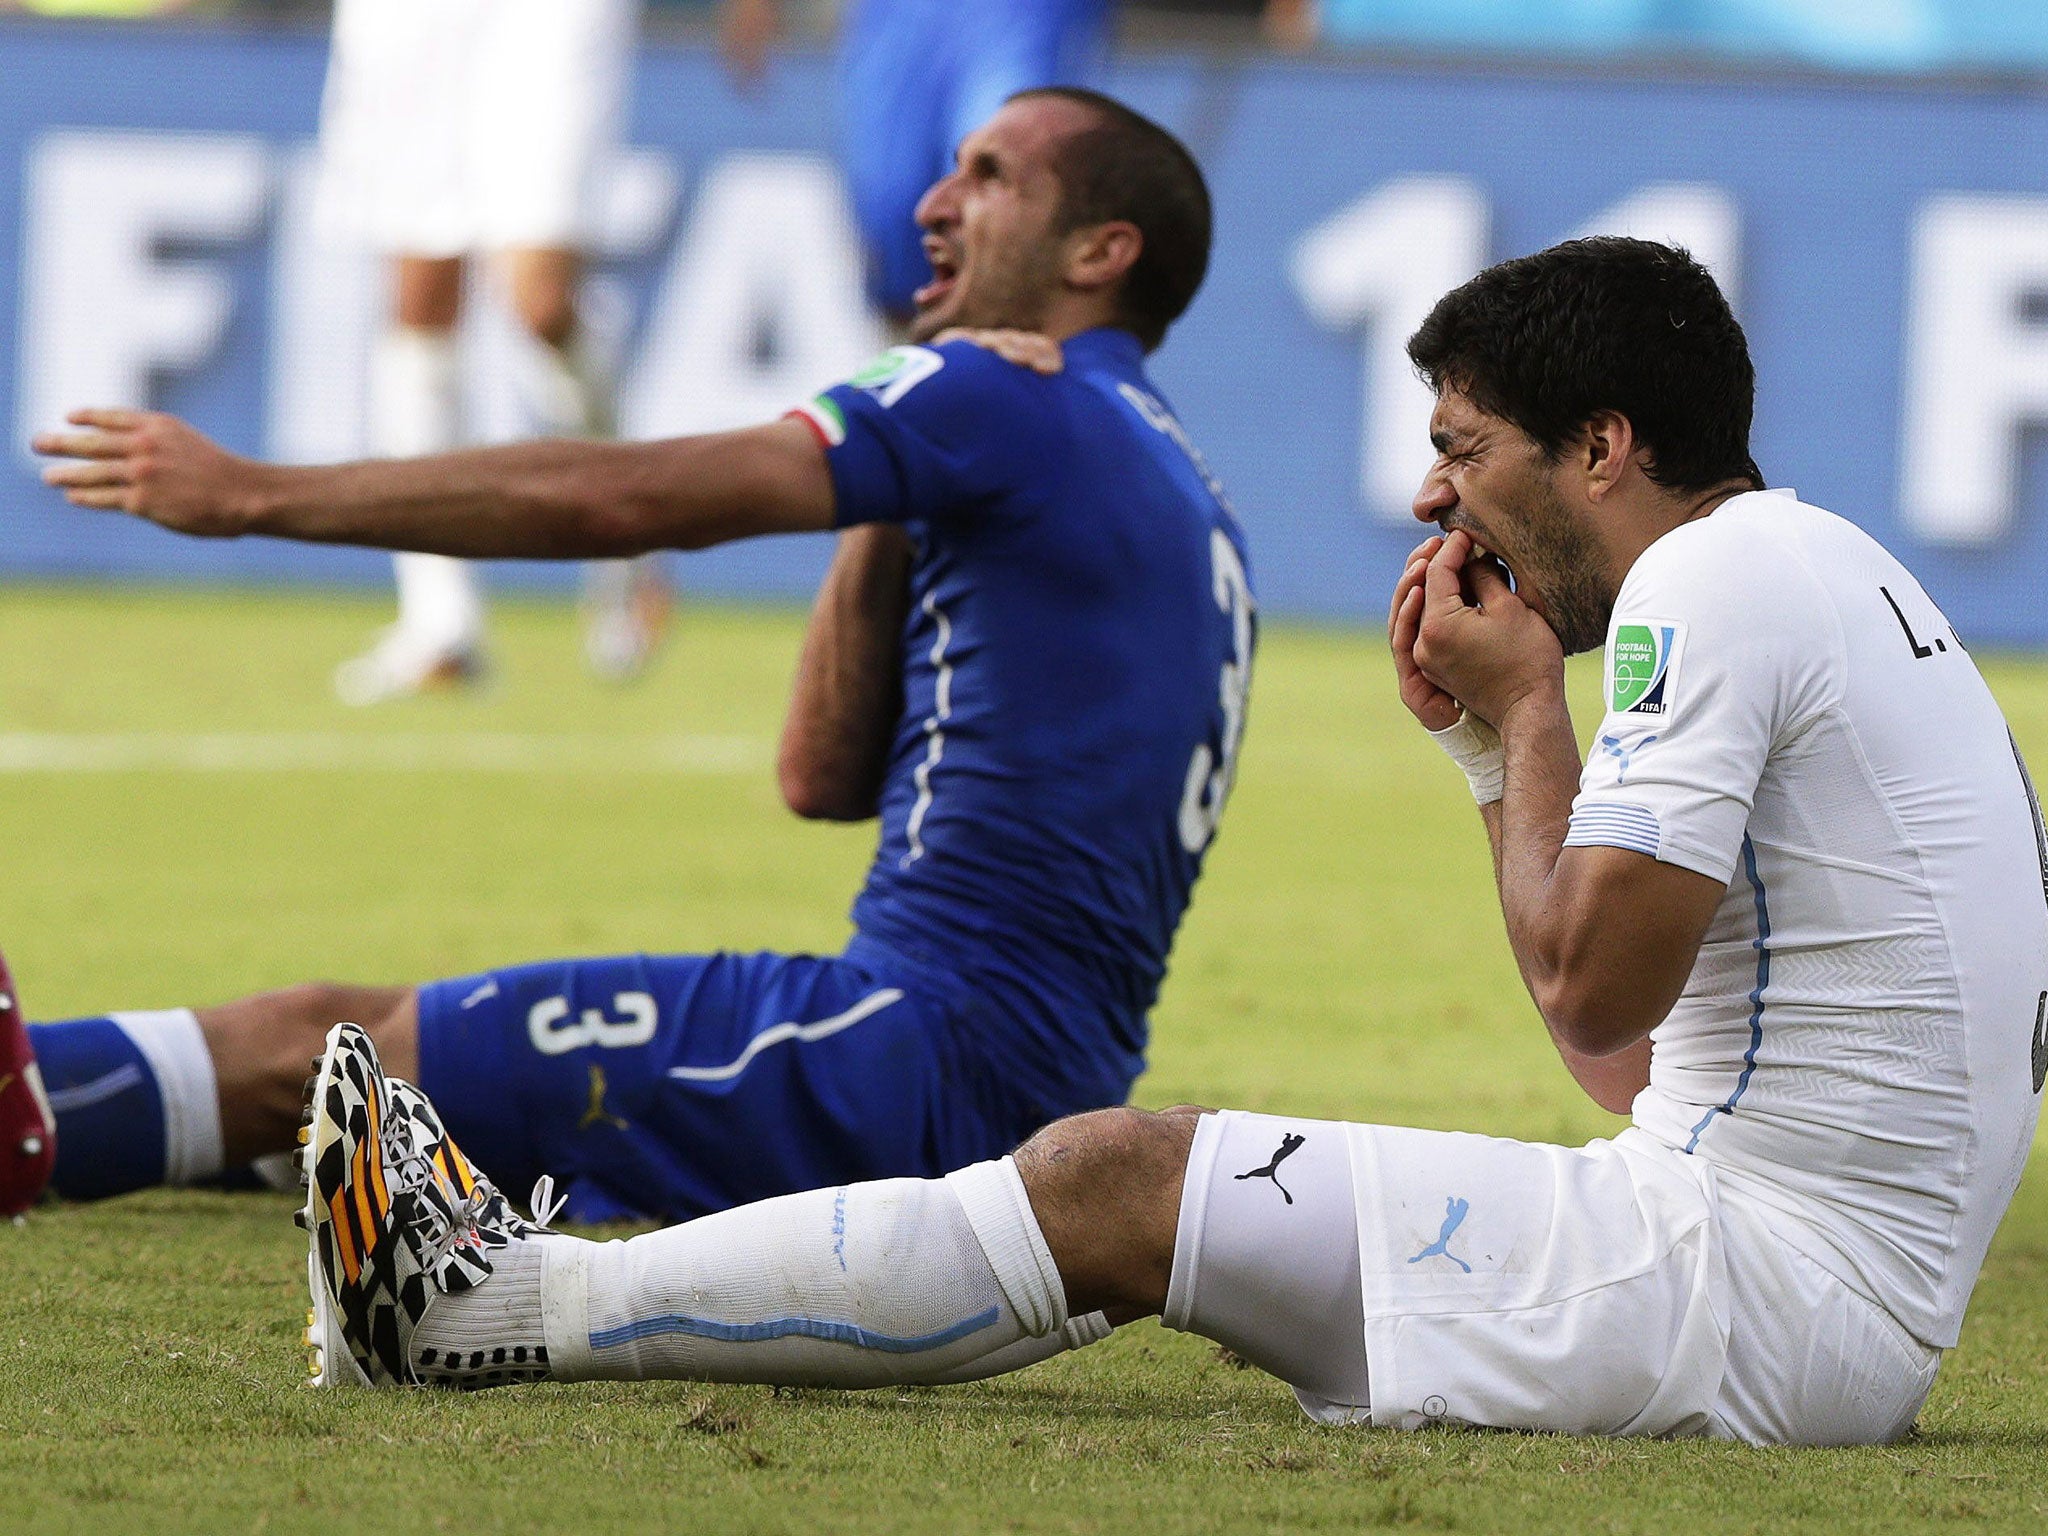 Italy's Giorgio Chiellini (L) claims he was bitten by Uruguay's Luis Suarez (R) during the FIFA World Cup 2014 group D preliminary round match between Italy and Uruguay at the Estadio Arena das Dunas in Natal, Brazil